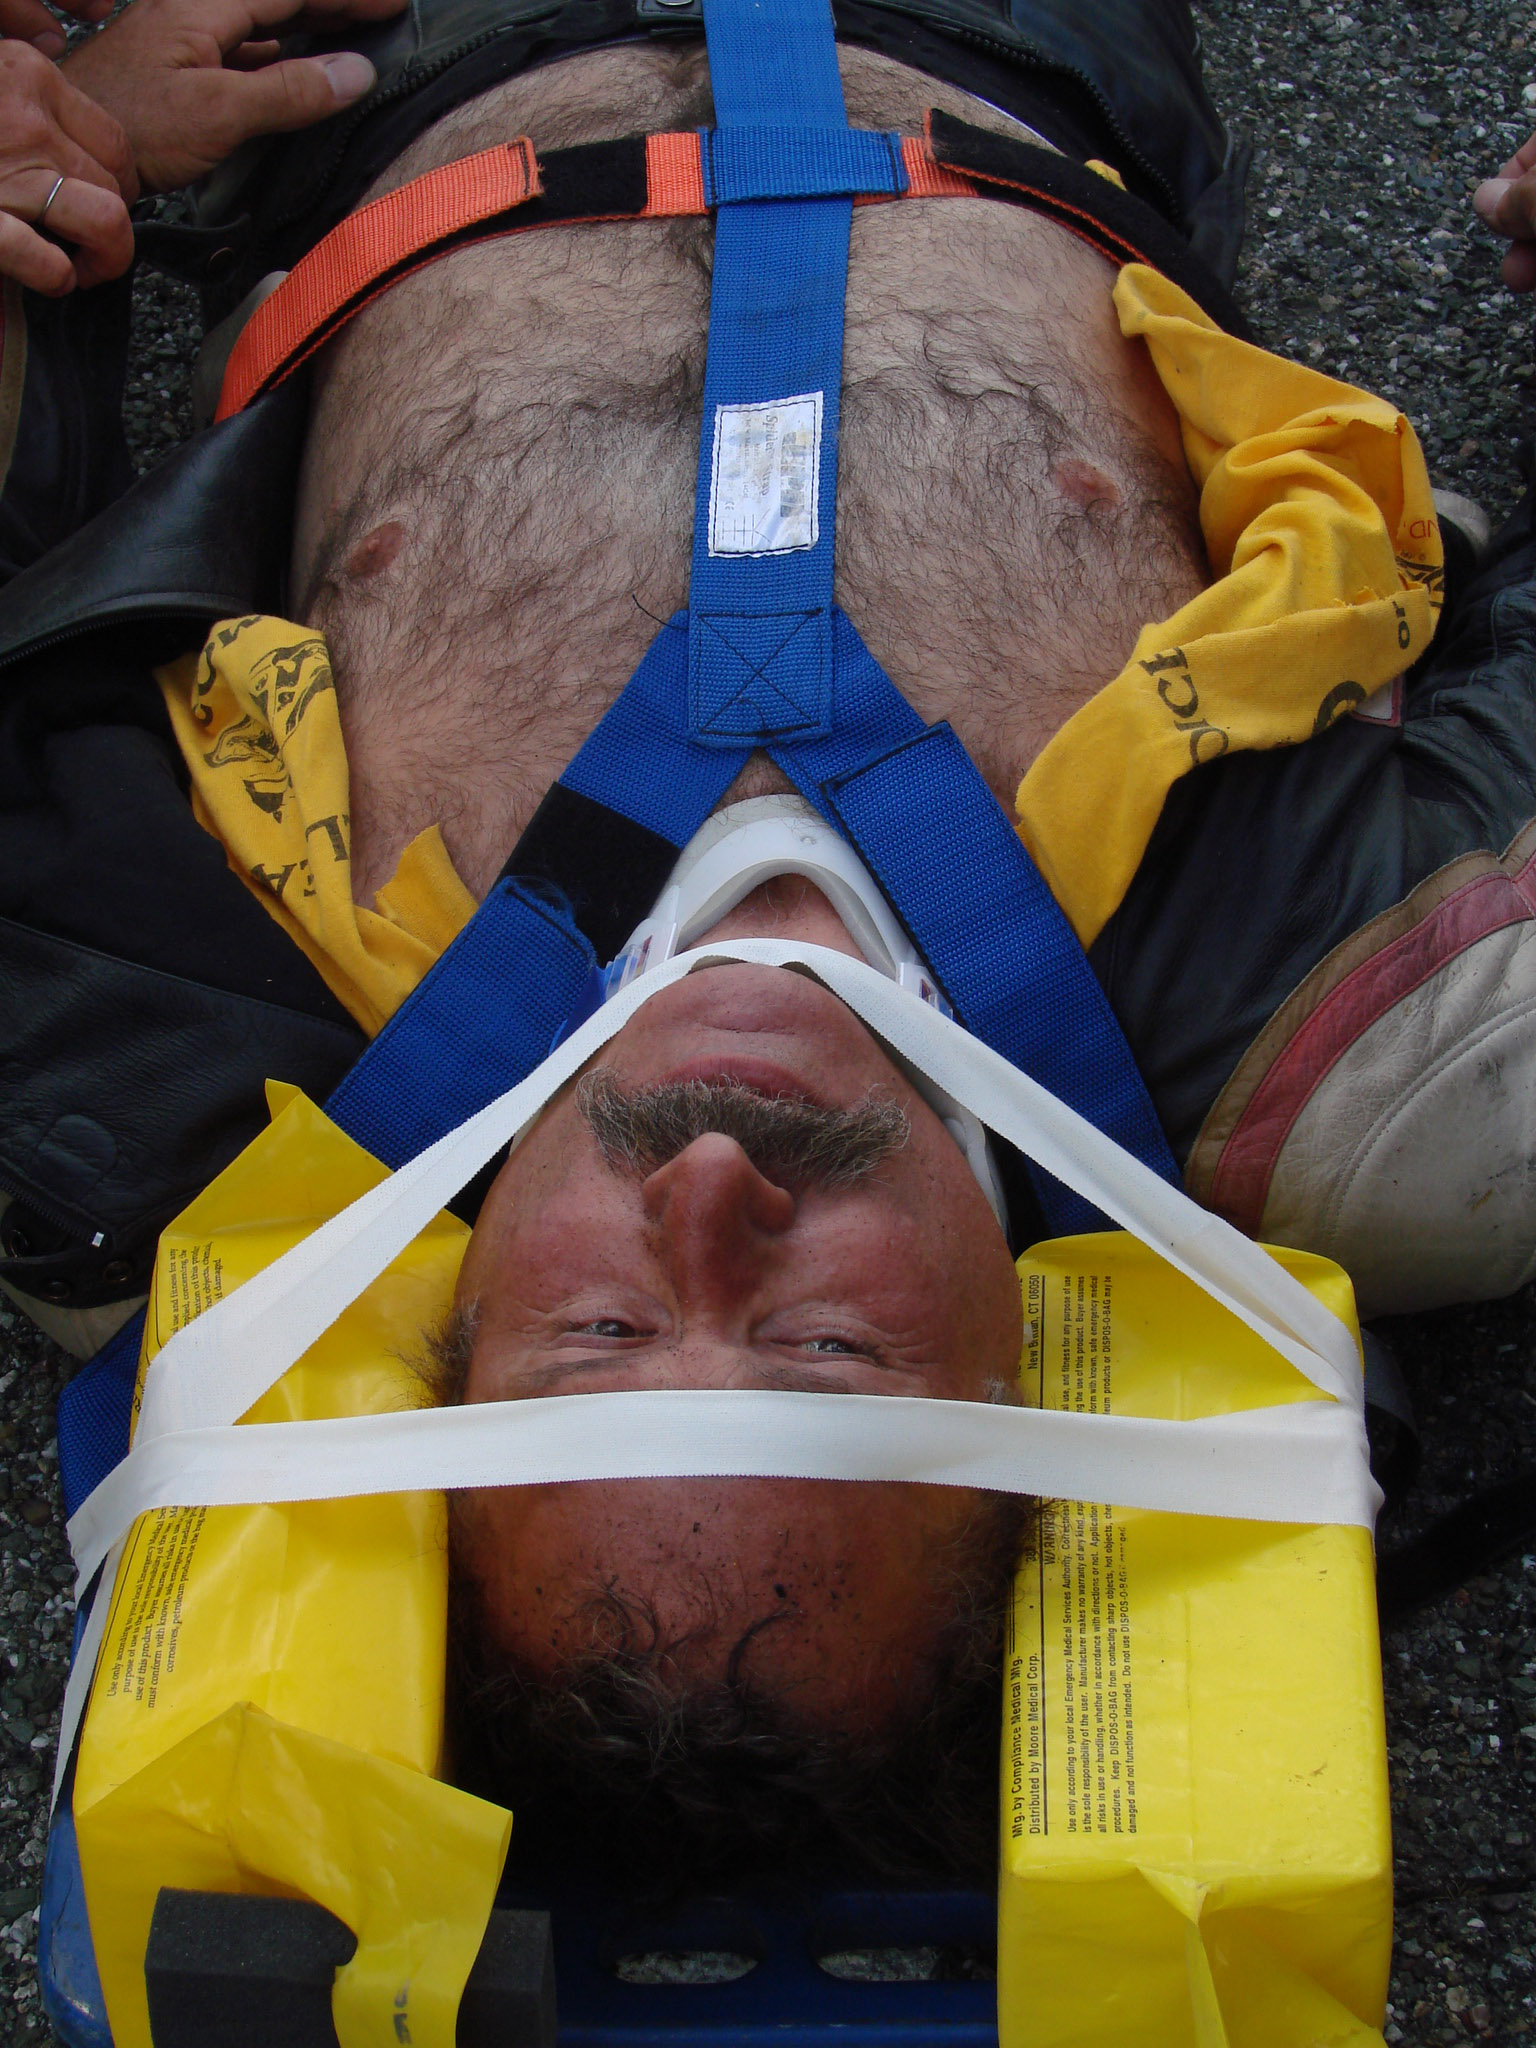 a man with a harness on wearing headgear